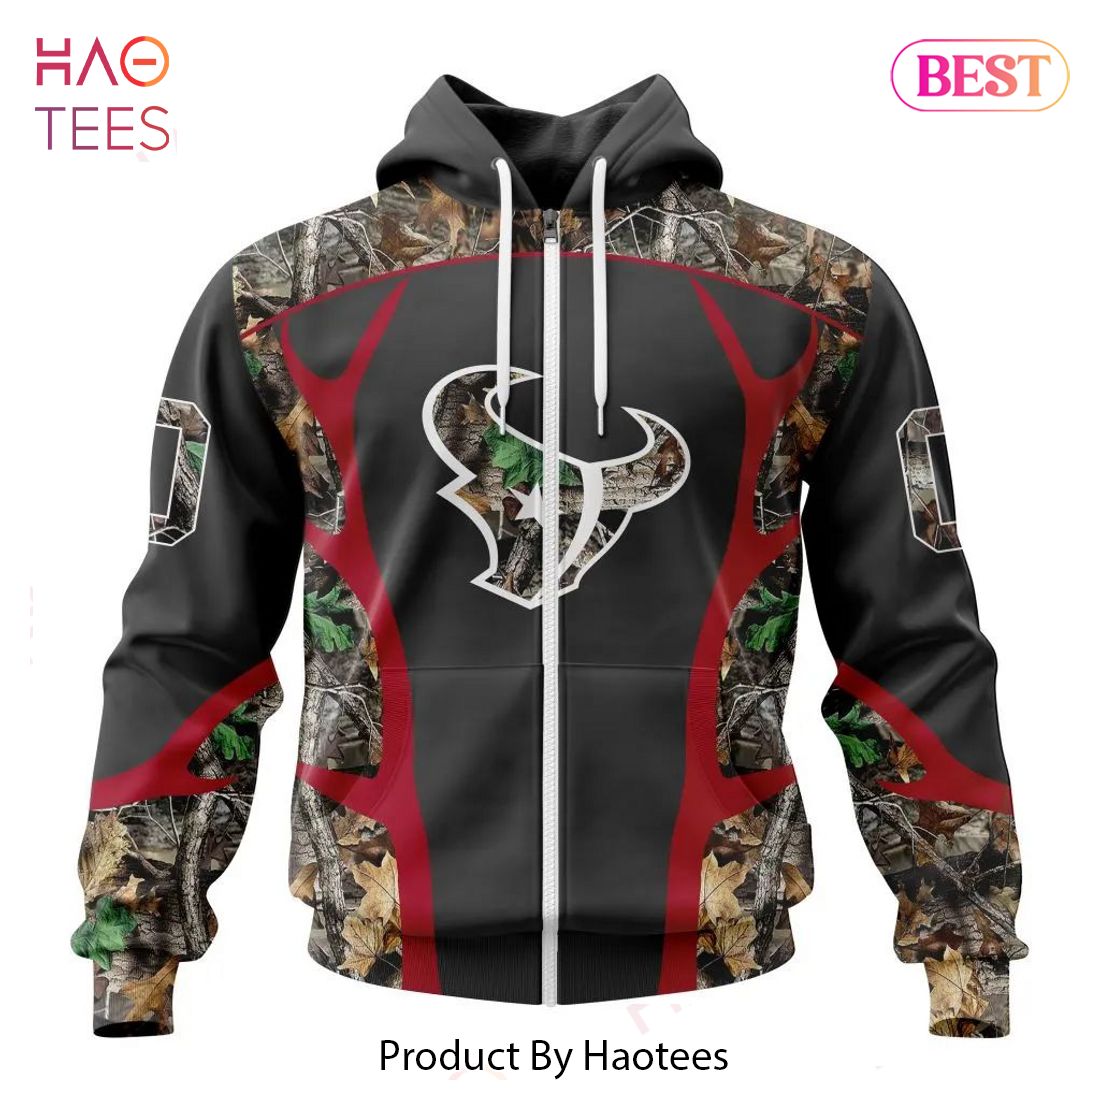 Do You Want To Try New Style On Haotees 03/22/2023